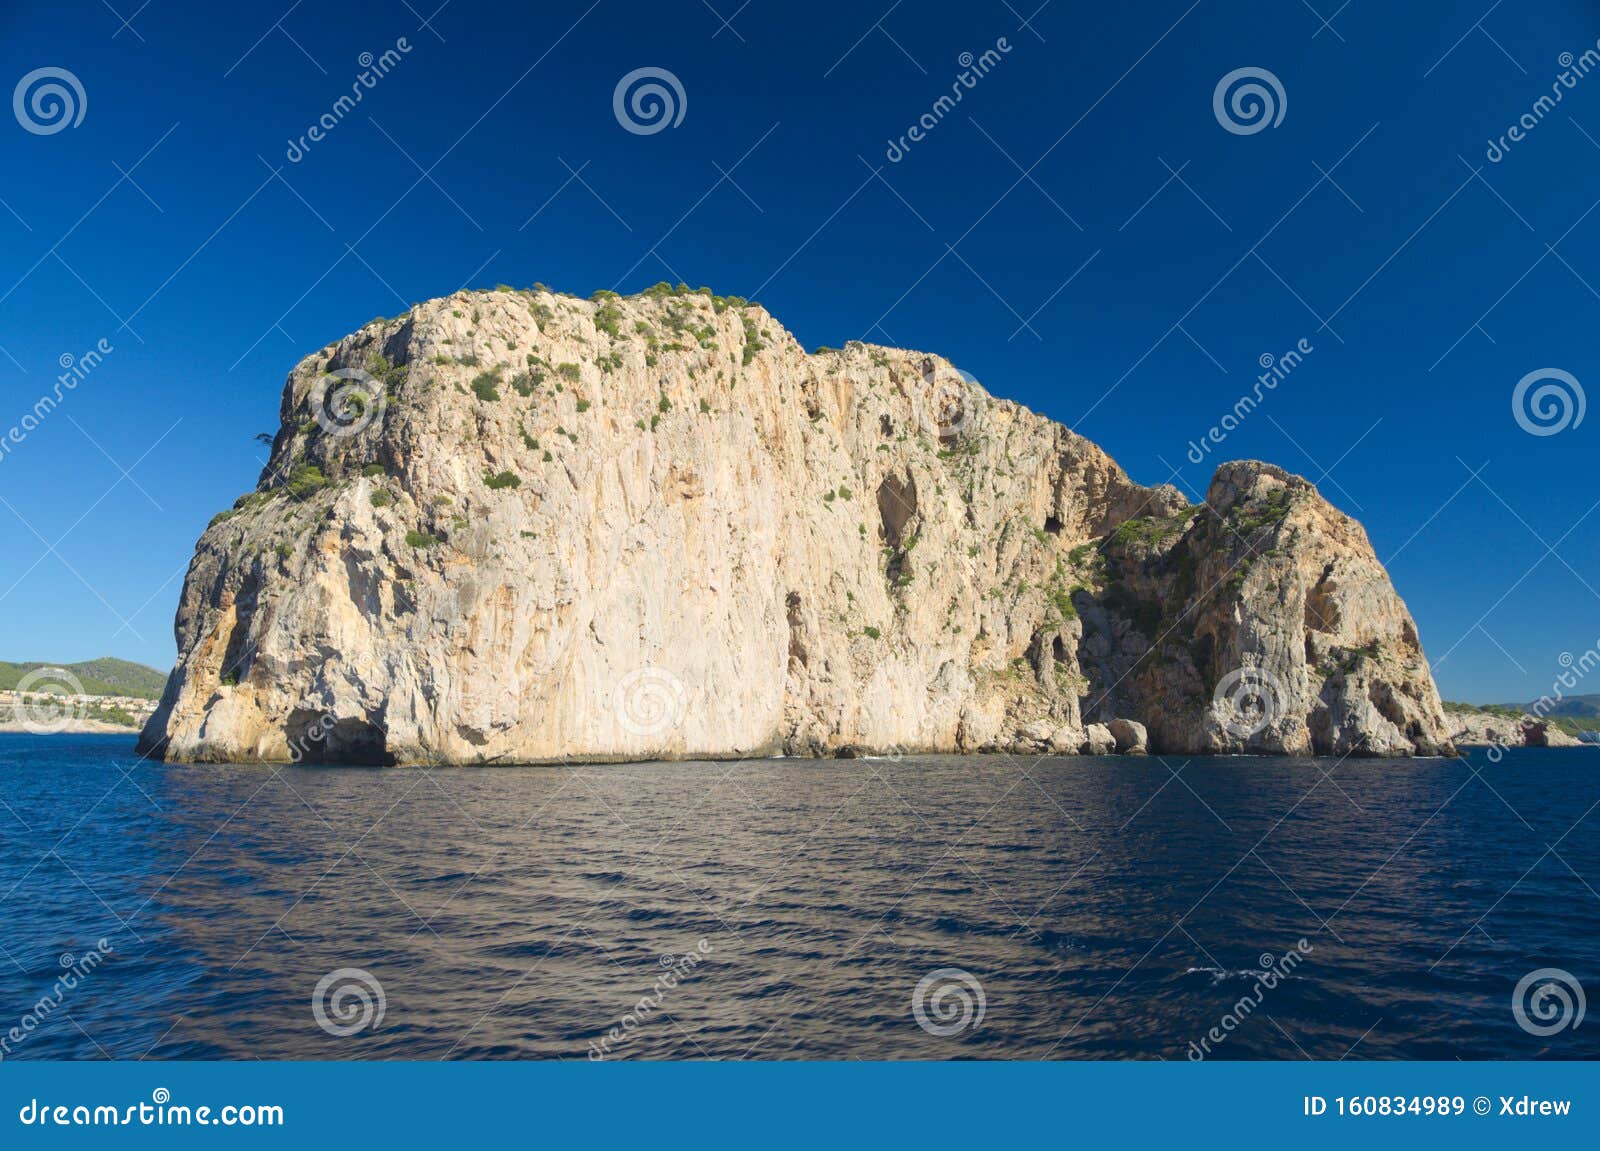 rock and cliff in blue sea